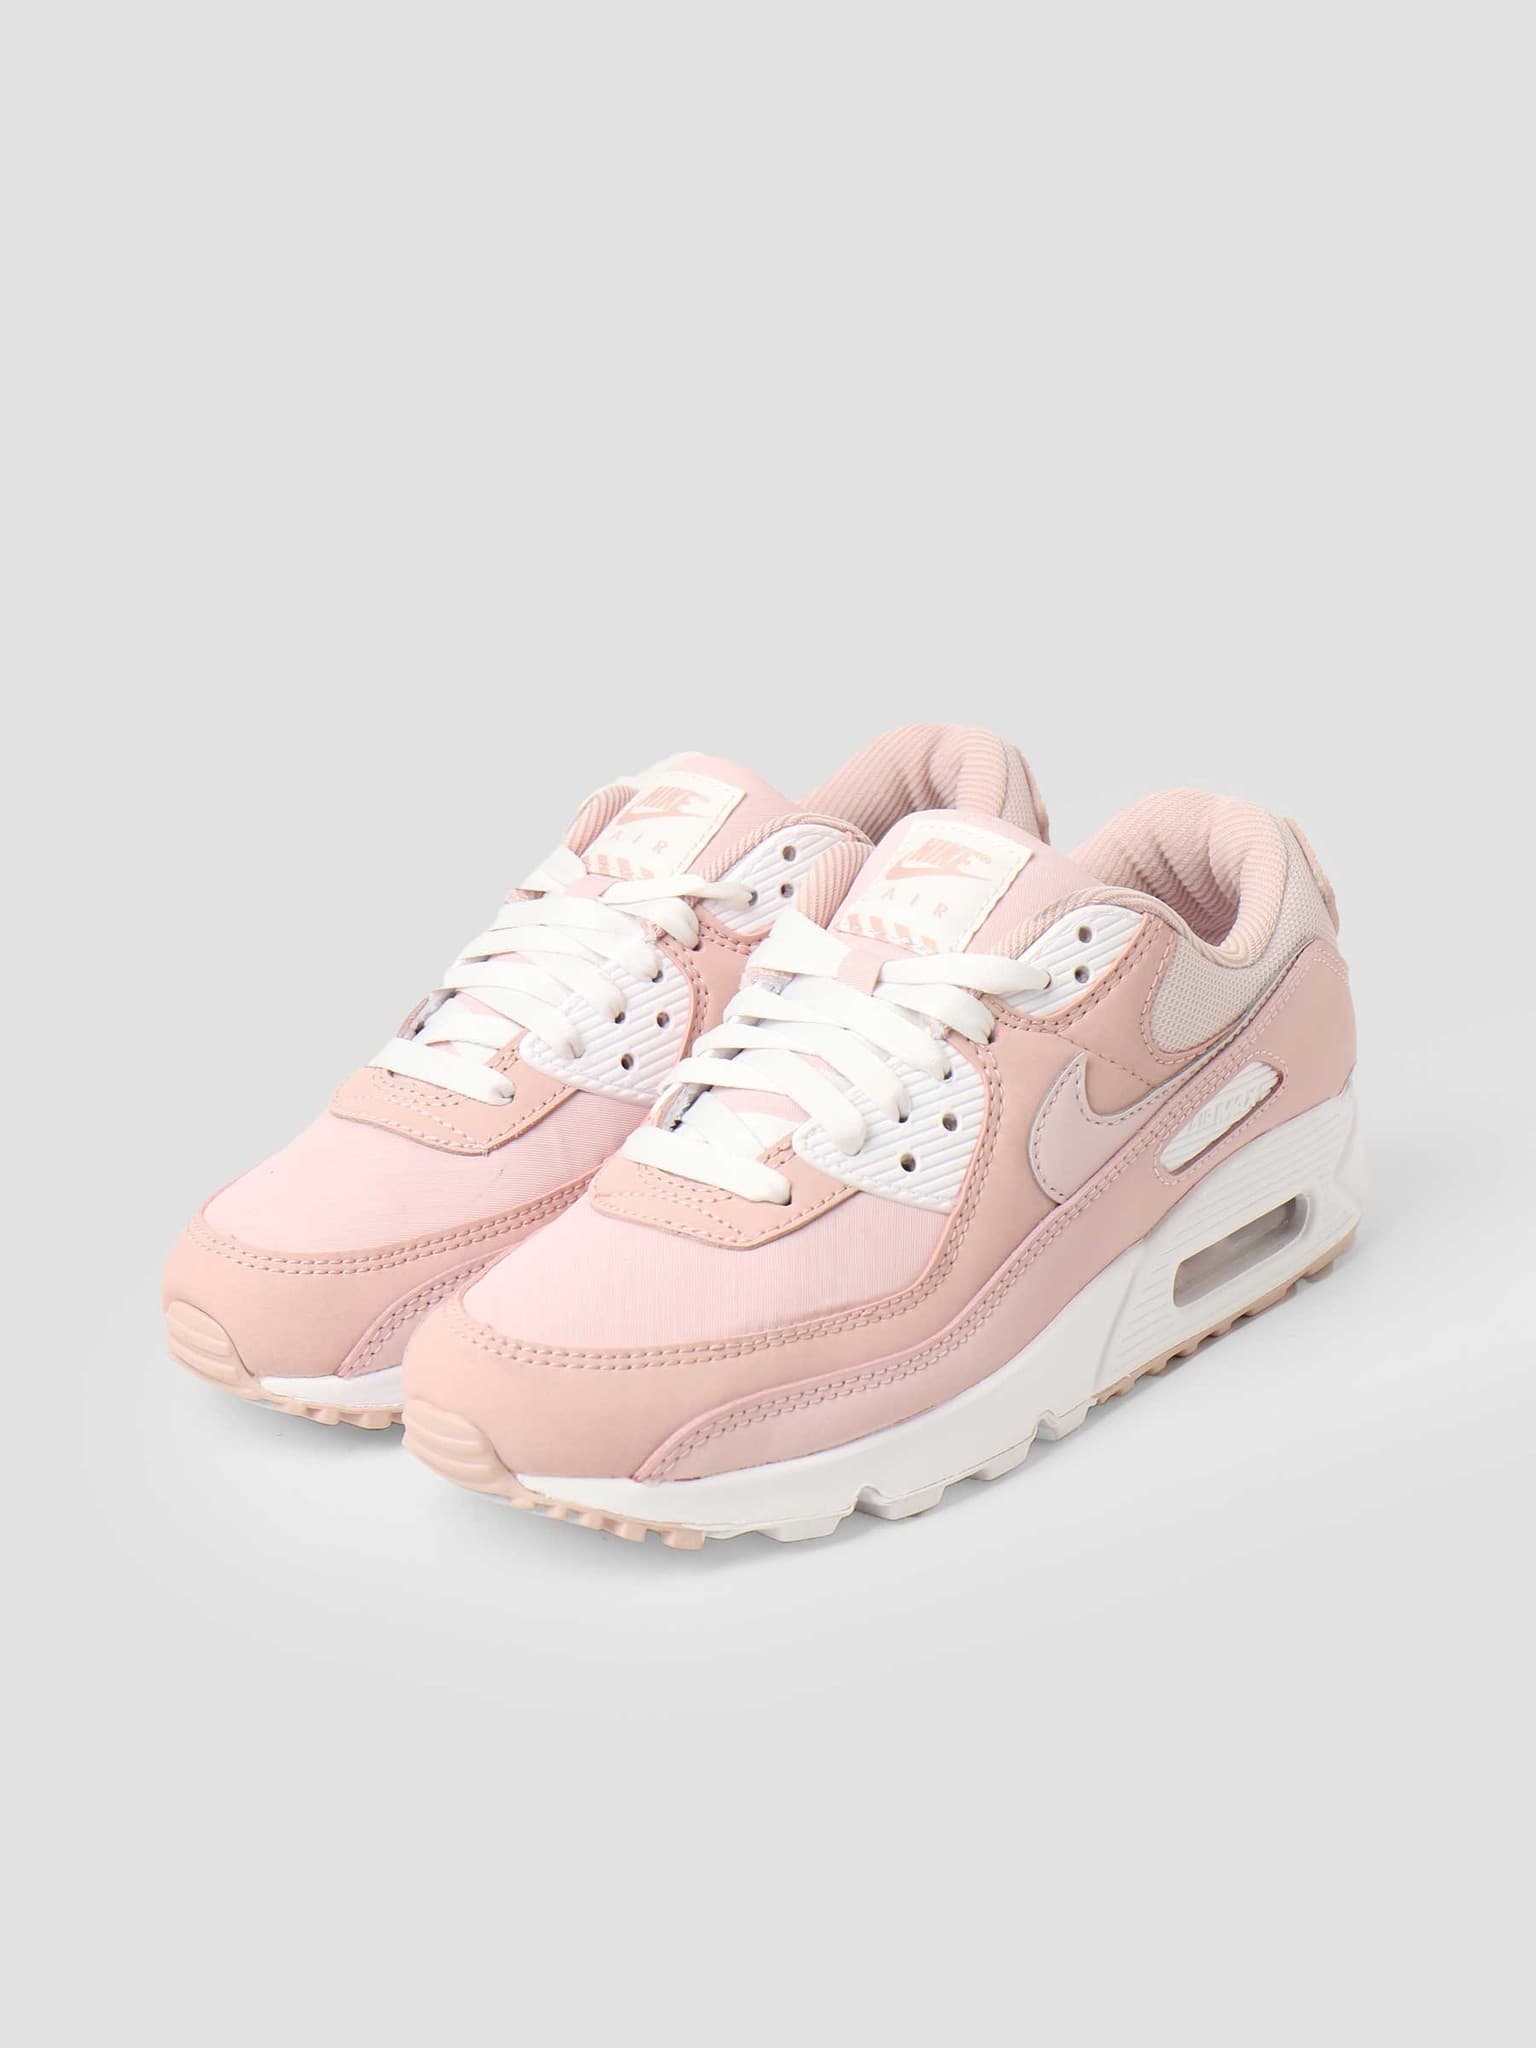 W Air Max 90 Barely Rose Barely Rose Pink Oxford DJ3862-600